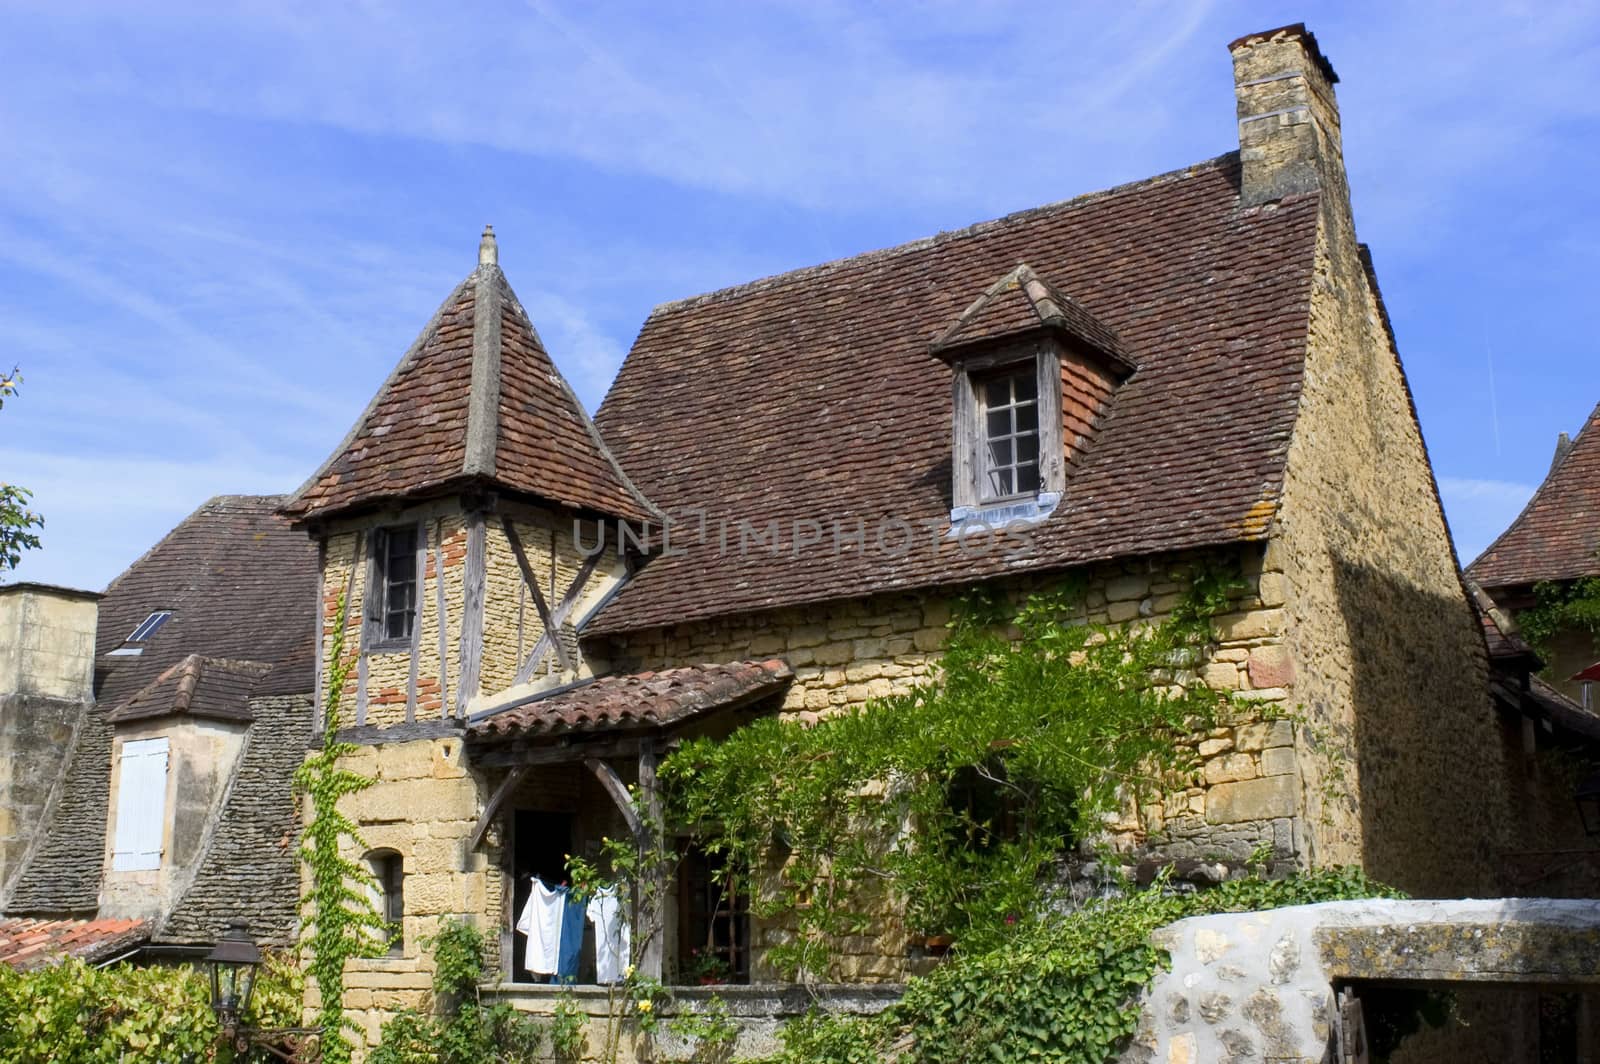 One of the oldest house in Sarlat